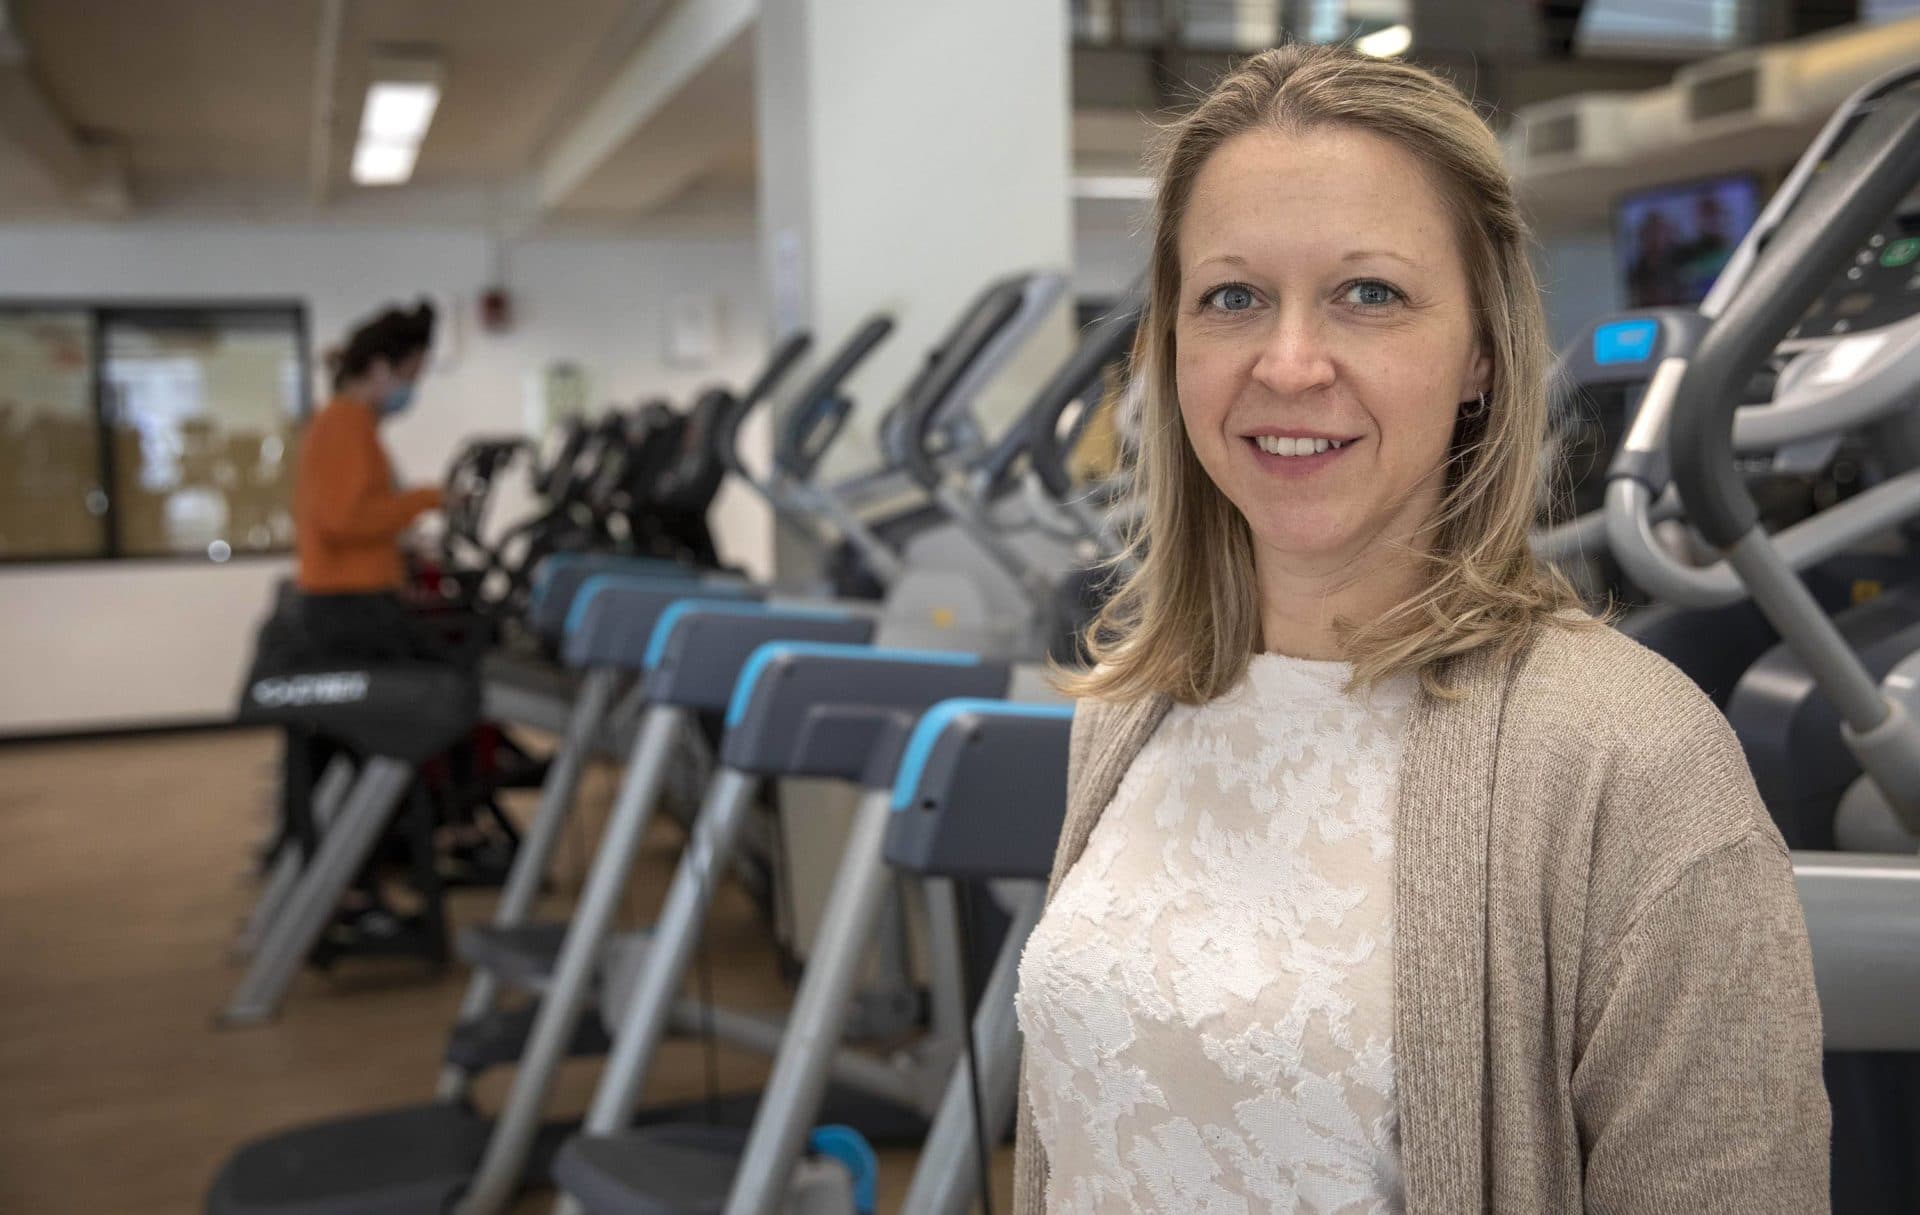 Jody Hinman is the general manager at Healthworks Fitness in Back Bay, Boston. (Robin Lubbock/WBUR)